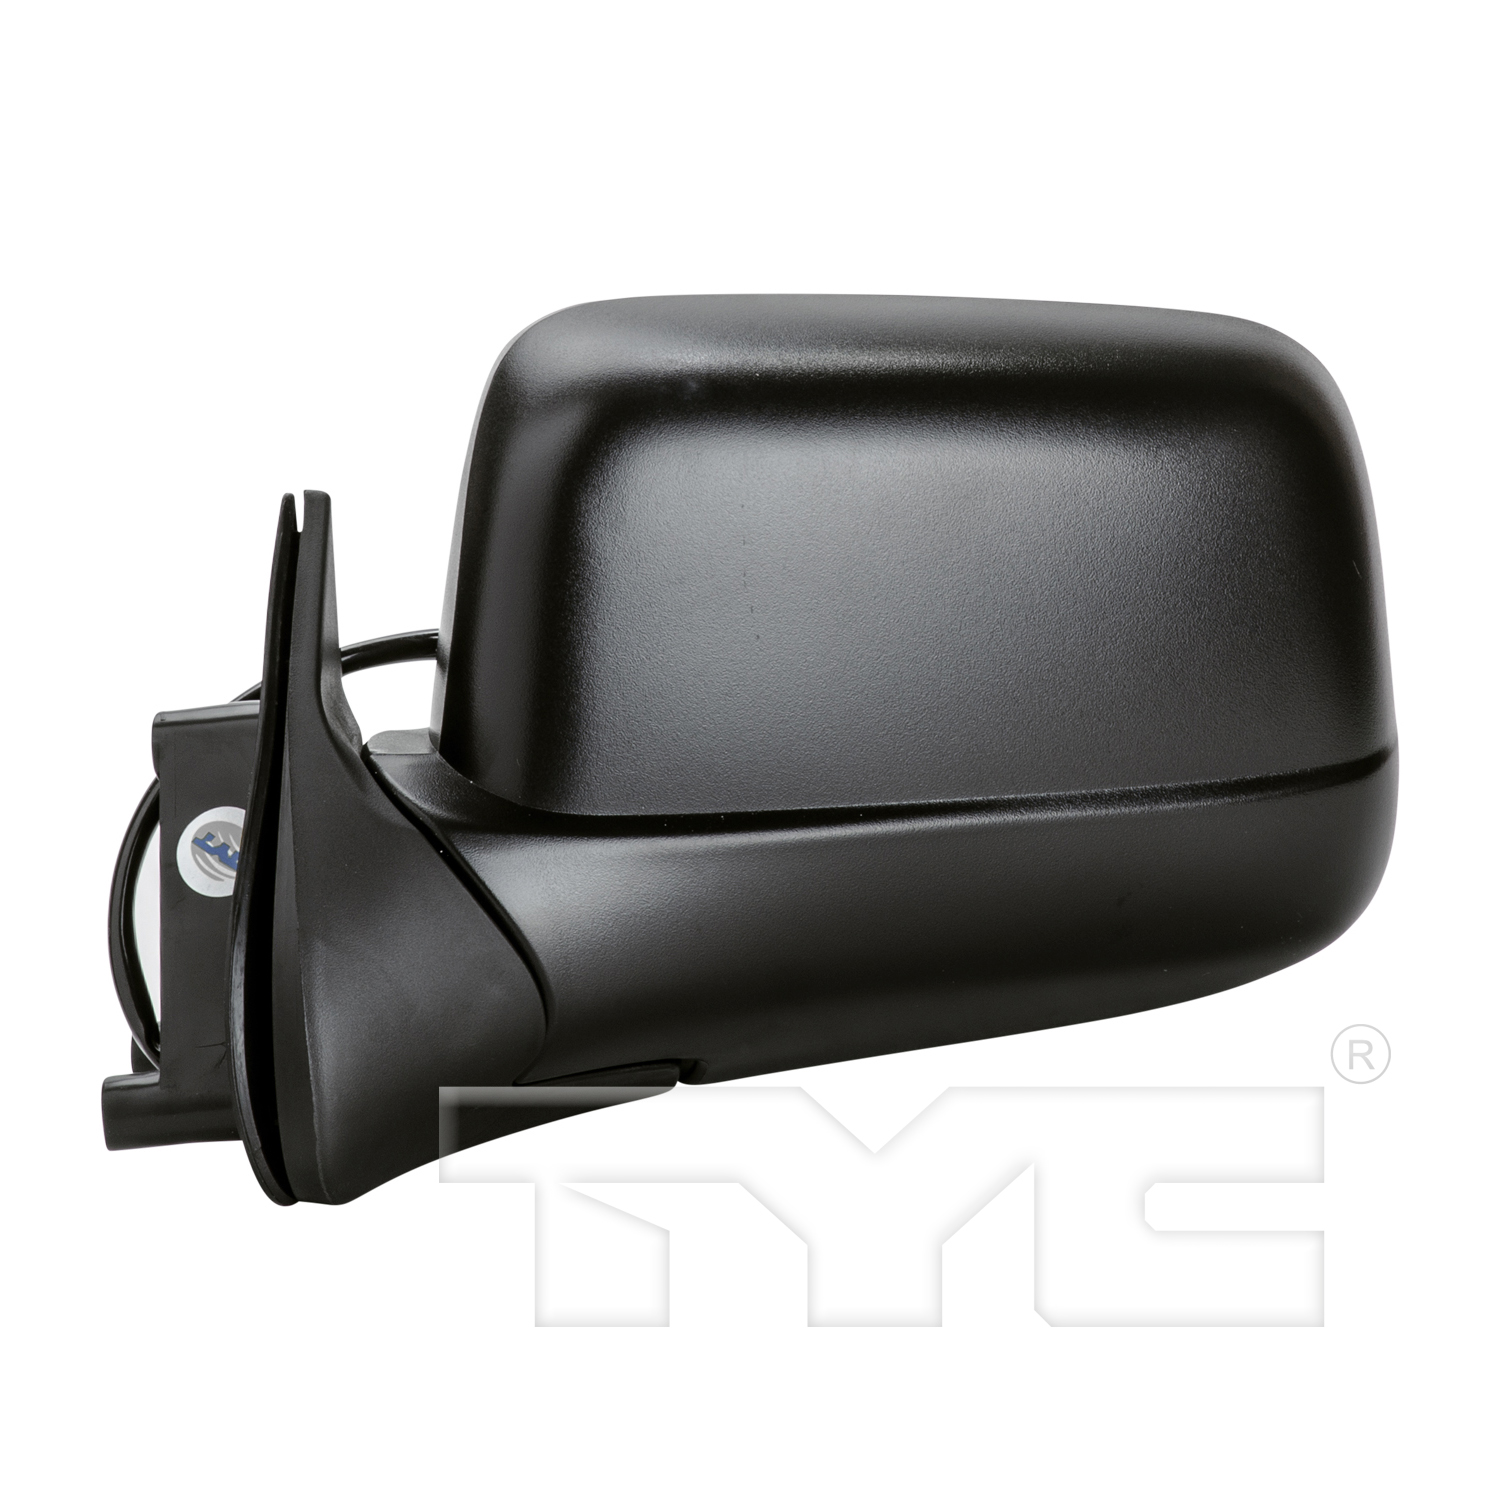 Aftermarket MIRRORS for NISSAN - FRONTIER, FRONTIER,98-00,LT Mirror outside rear view